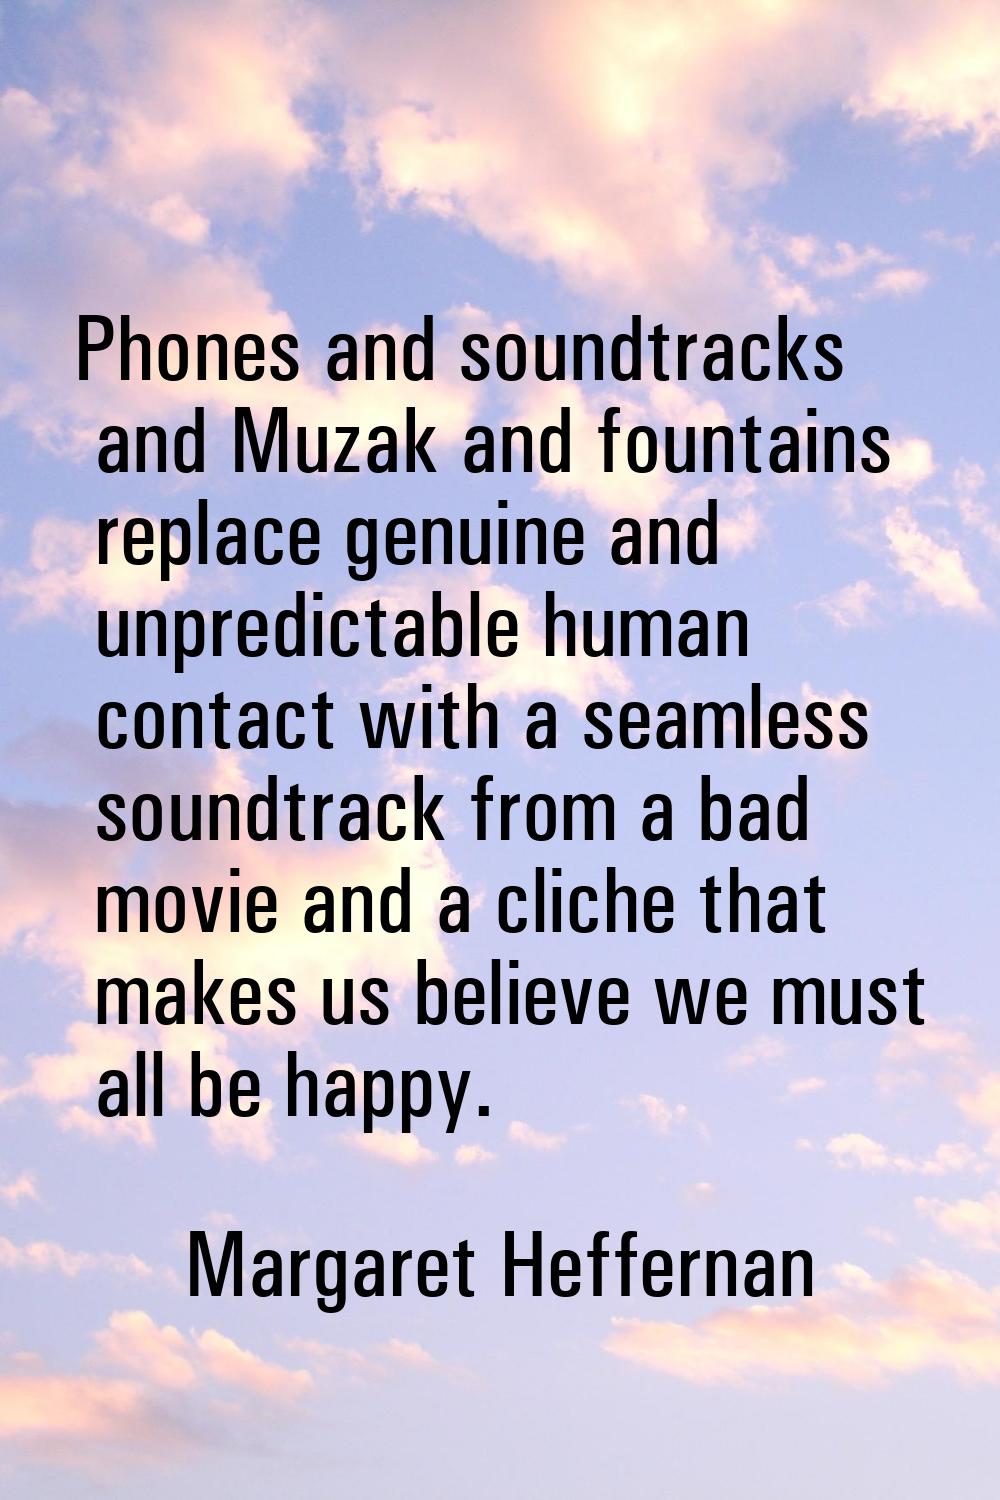 Phones and soundtracks and Muzak and fountains replace genuine and unpredictable human contact with